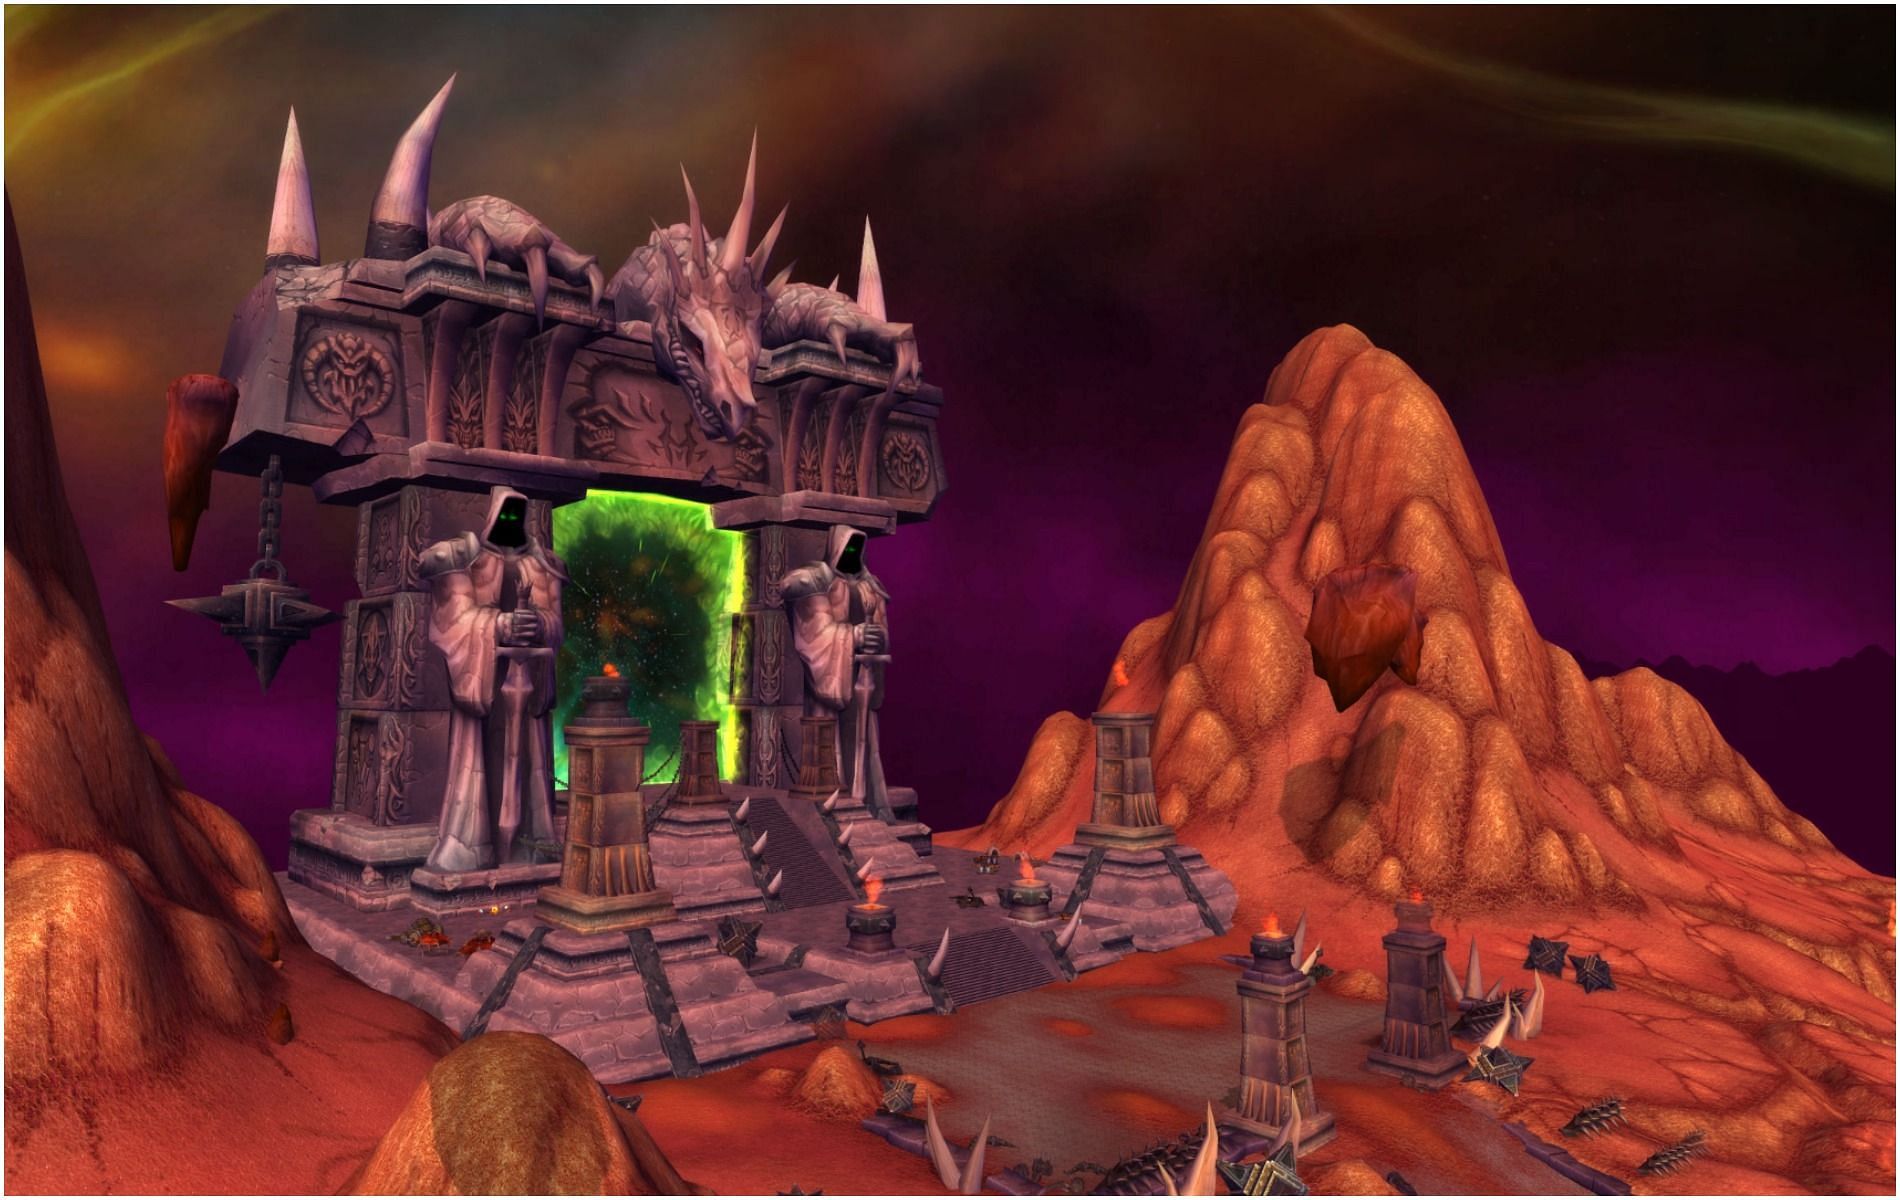 What awaits World of Warcraft fans? The next expansion will be revealed soon (Image via Activision Blizzard)